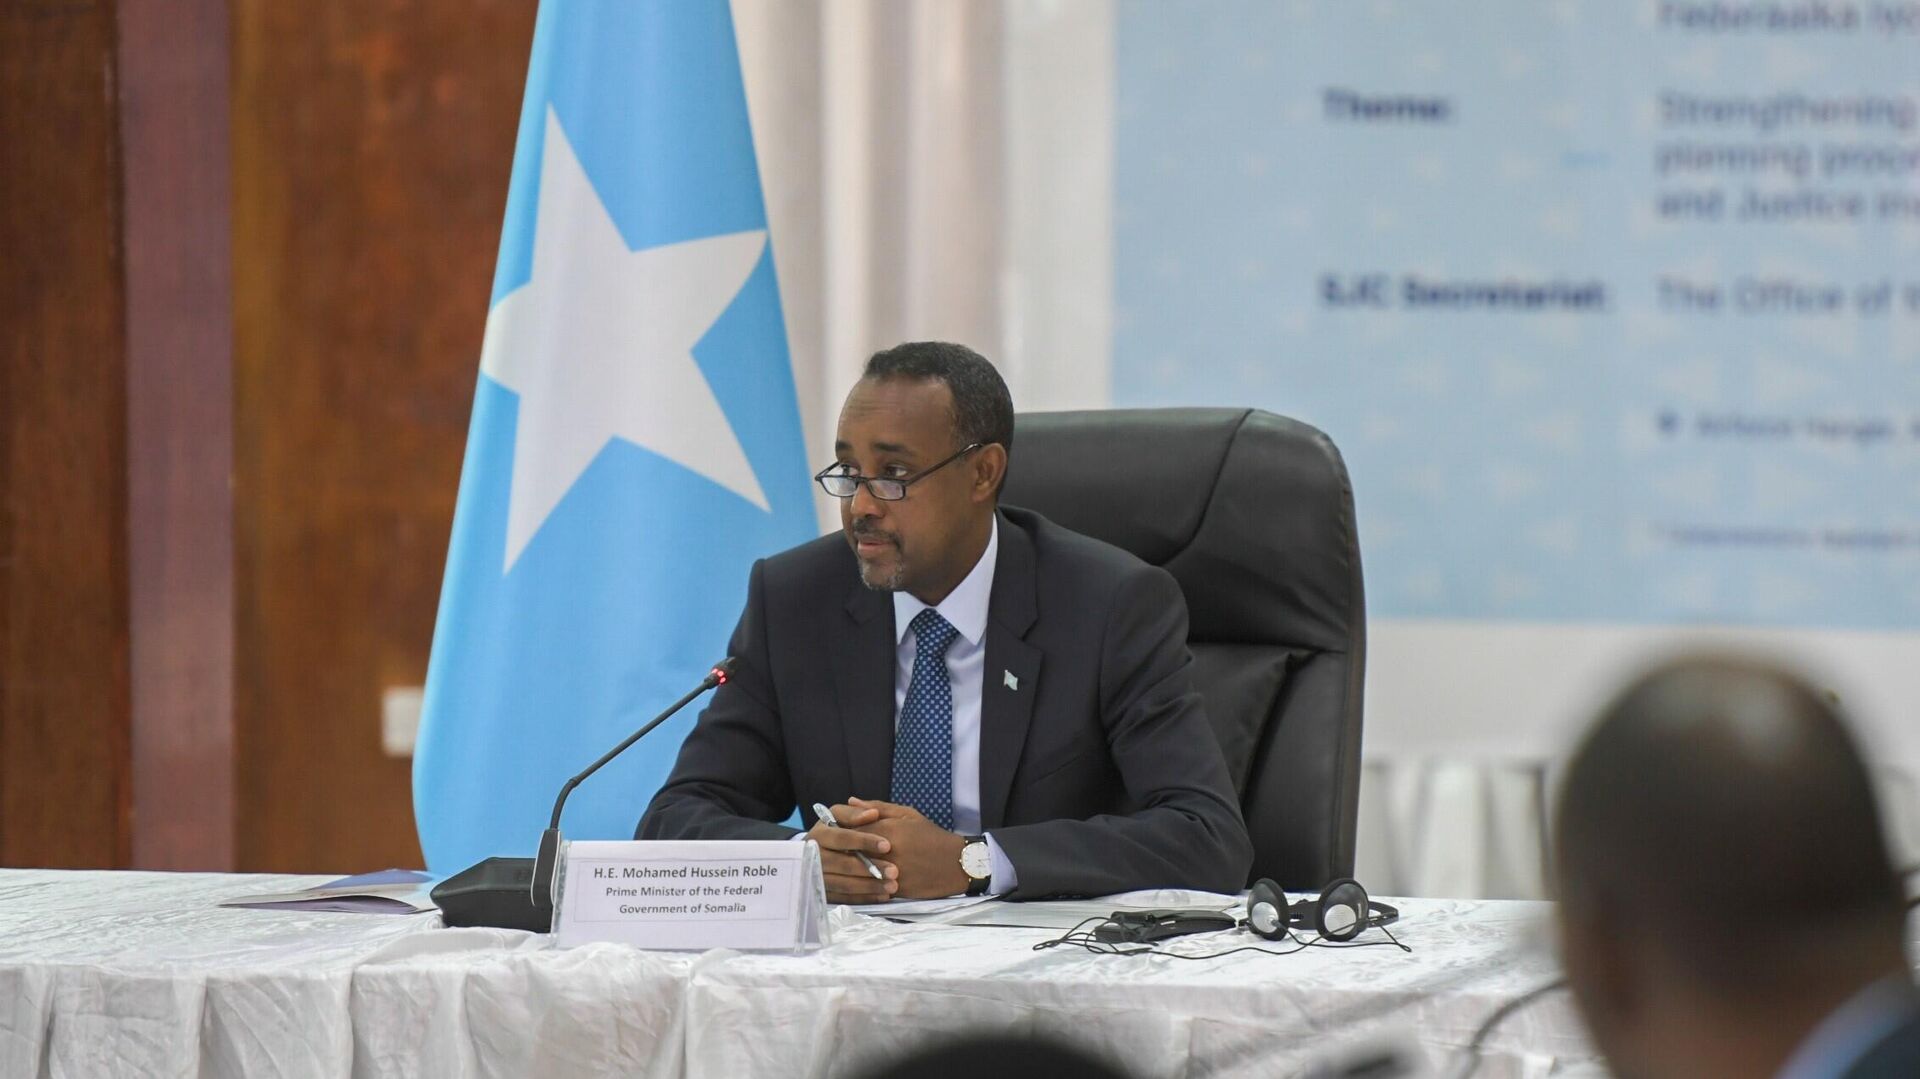 The Prime Minister of Somalia, Mohamed Hussein Roble, chairs a Security and Justice Committee meeting, involving top officials from the Federal Government of Somalia, Federal Member States and international partners, in Mogadishu, Somalia, on 1 December 2020. - Sputnik International, 1920, 02.01.2022